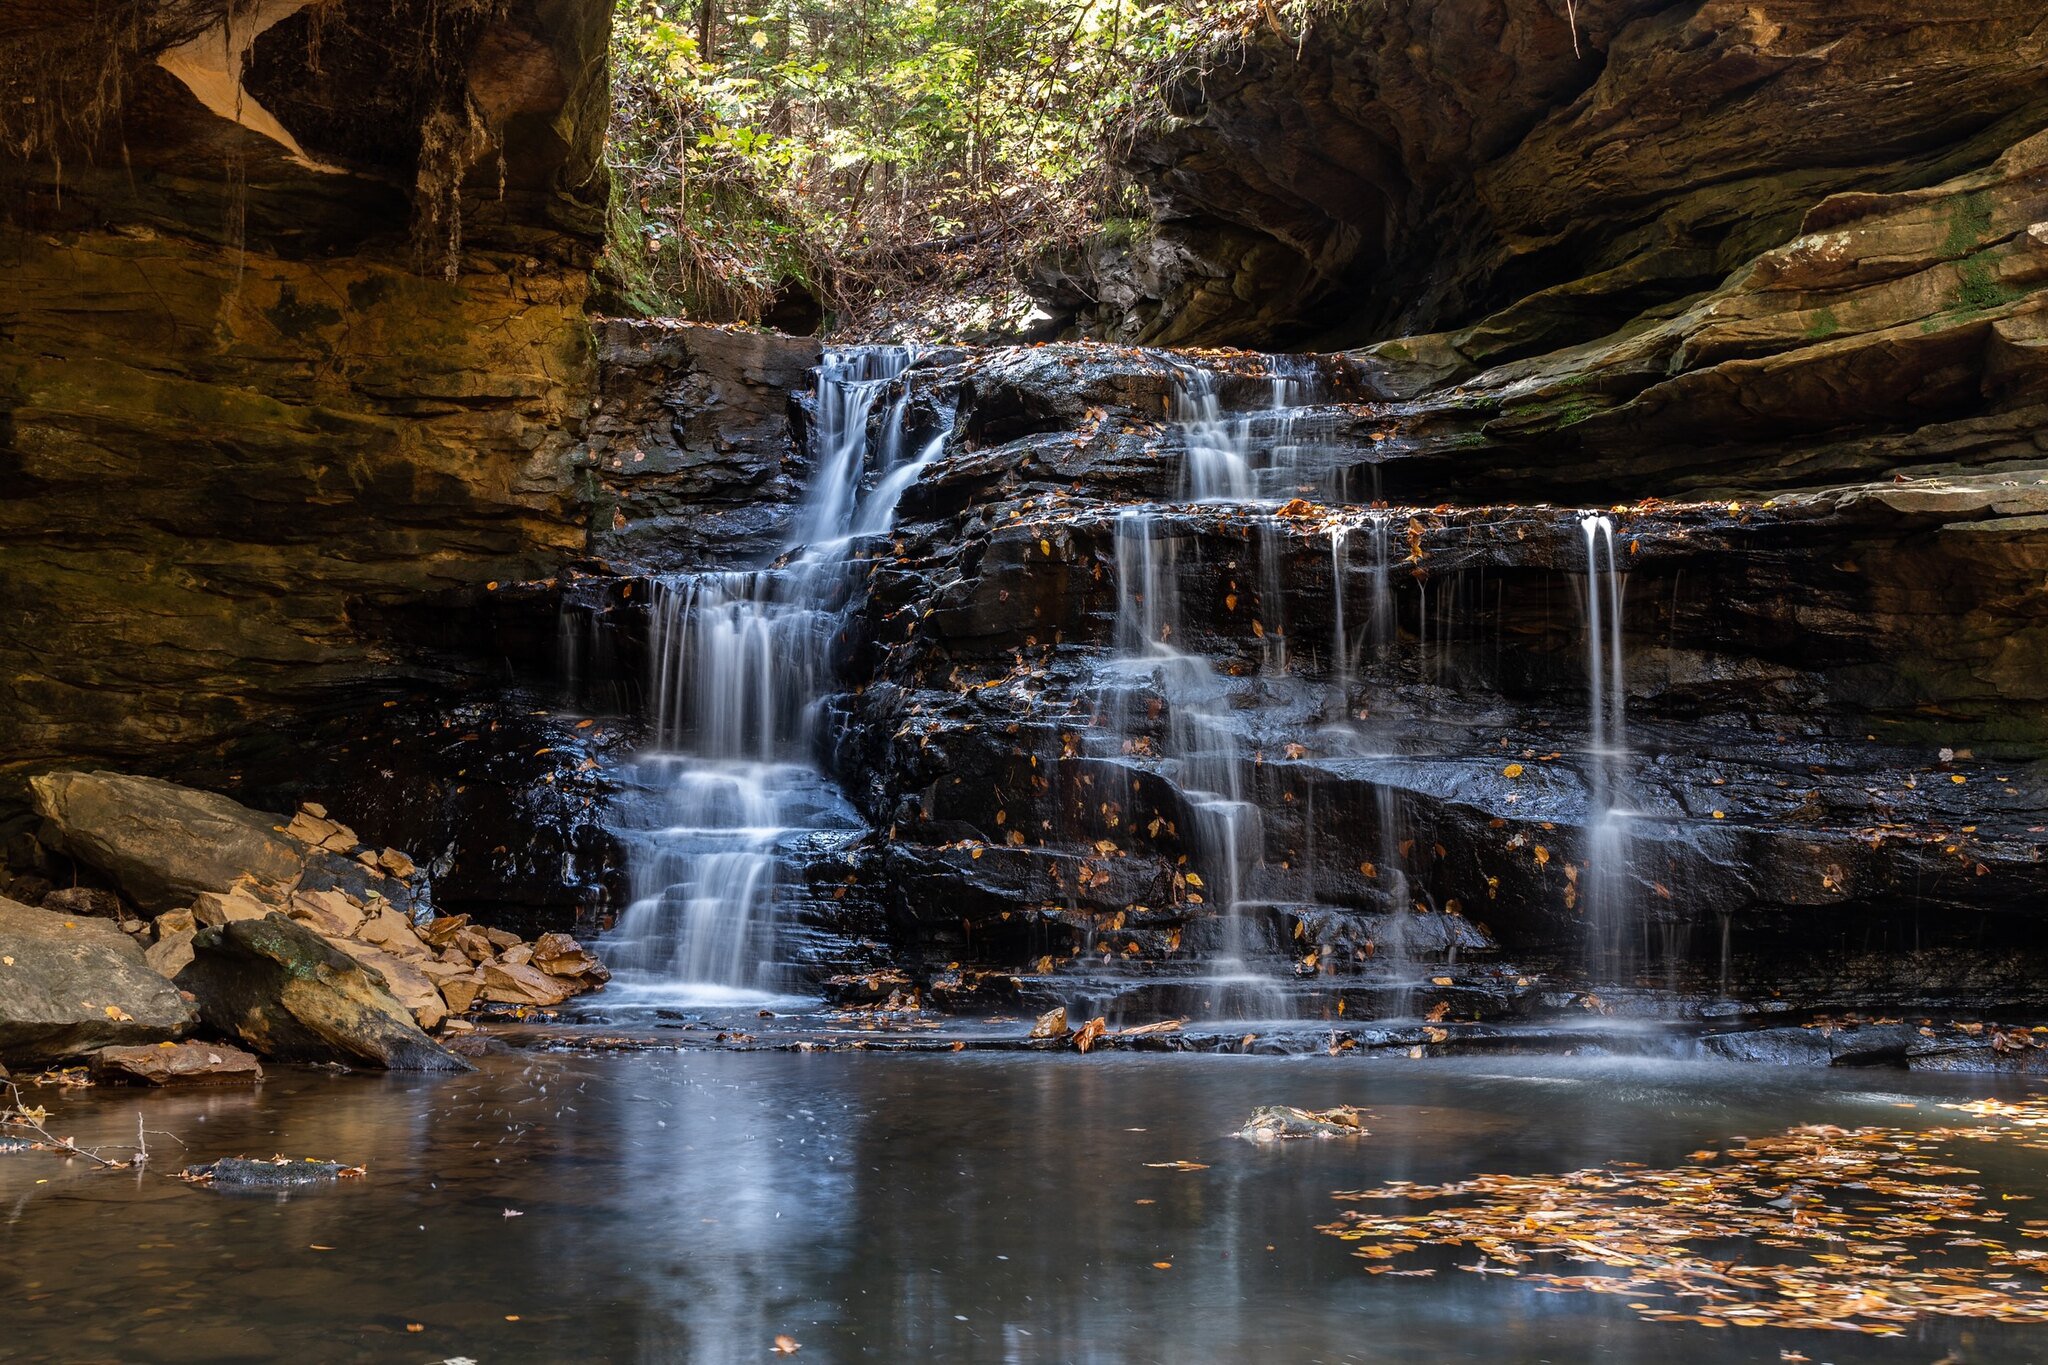 Small Waterfalls at the Bankhead National Forest